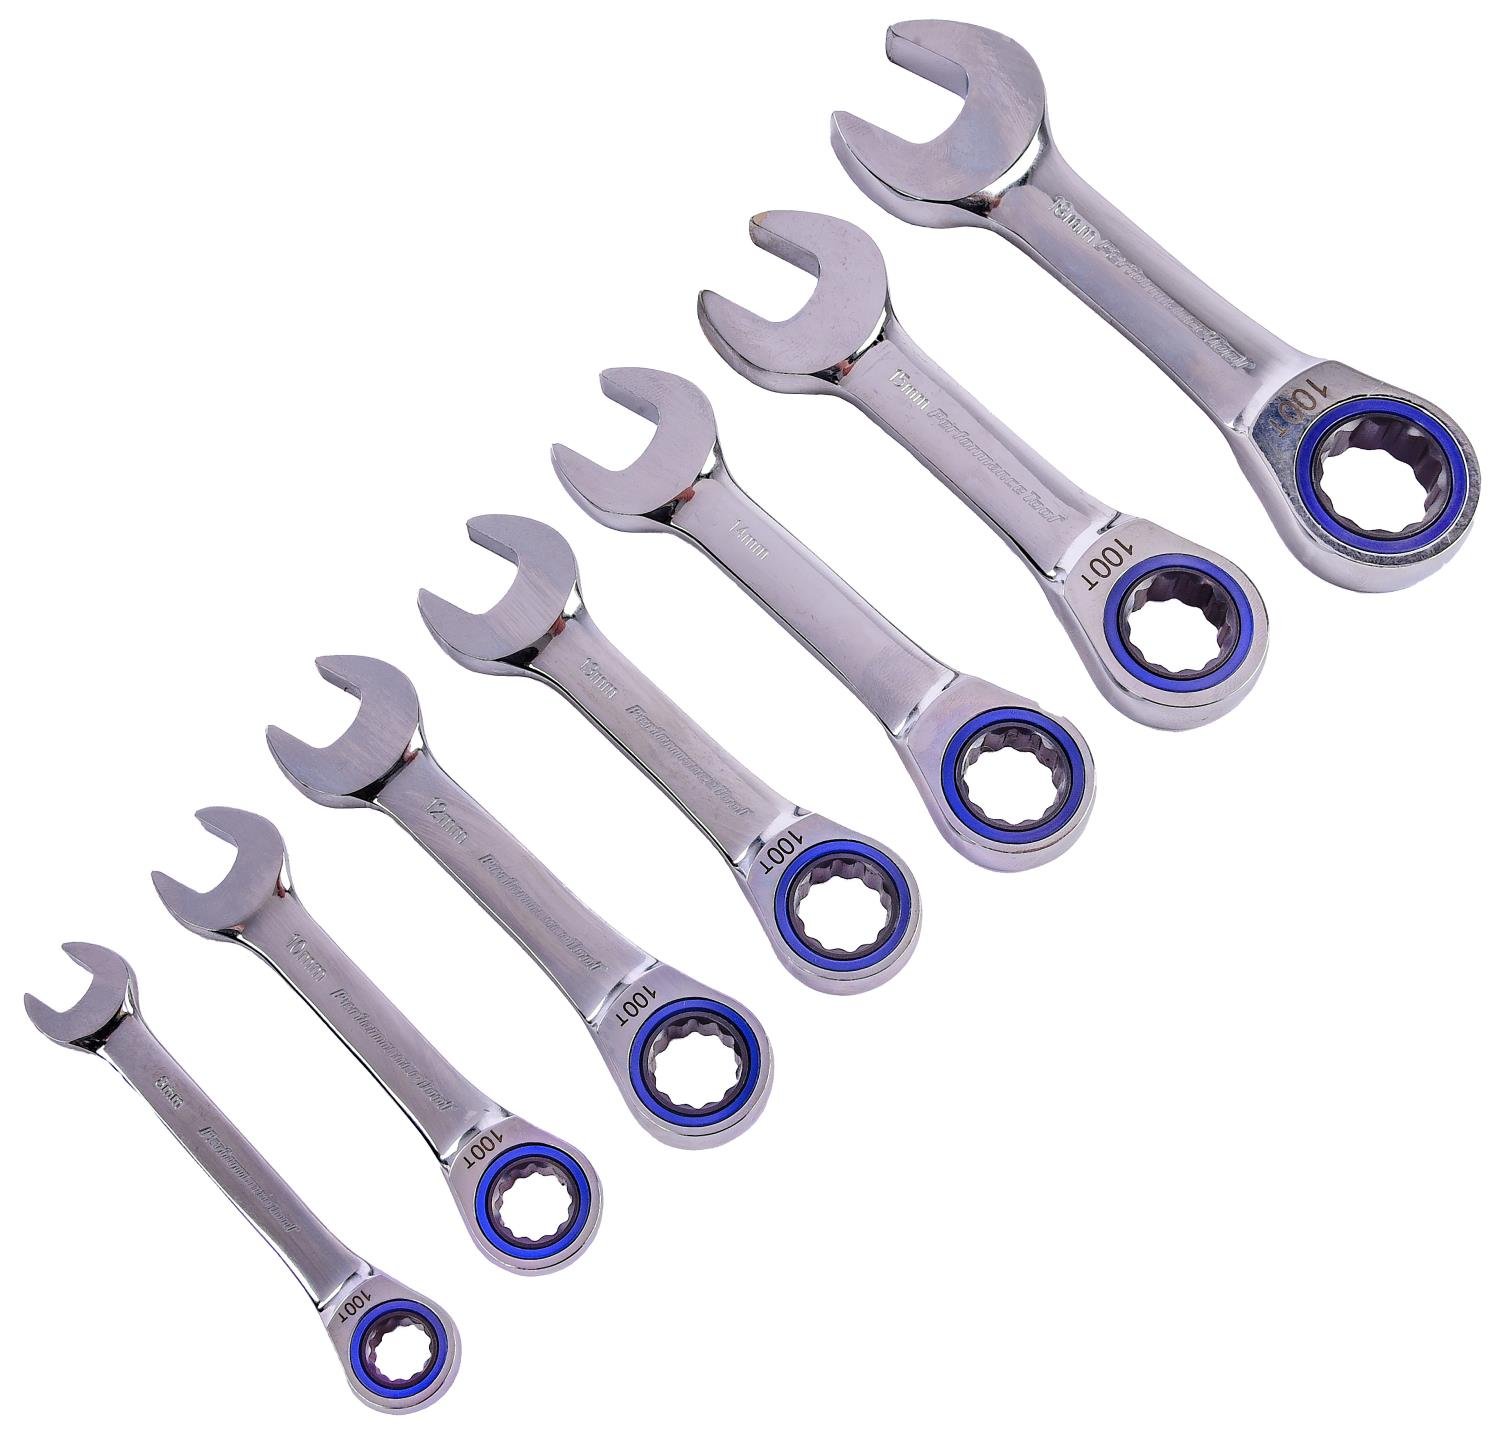 Ratcheting Wrench Set [7-Piece, Metric]